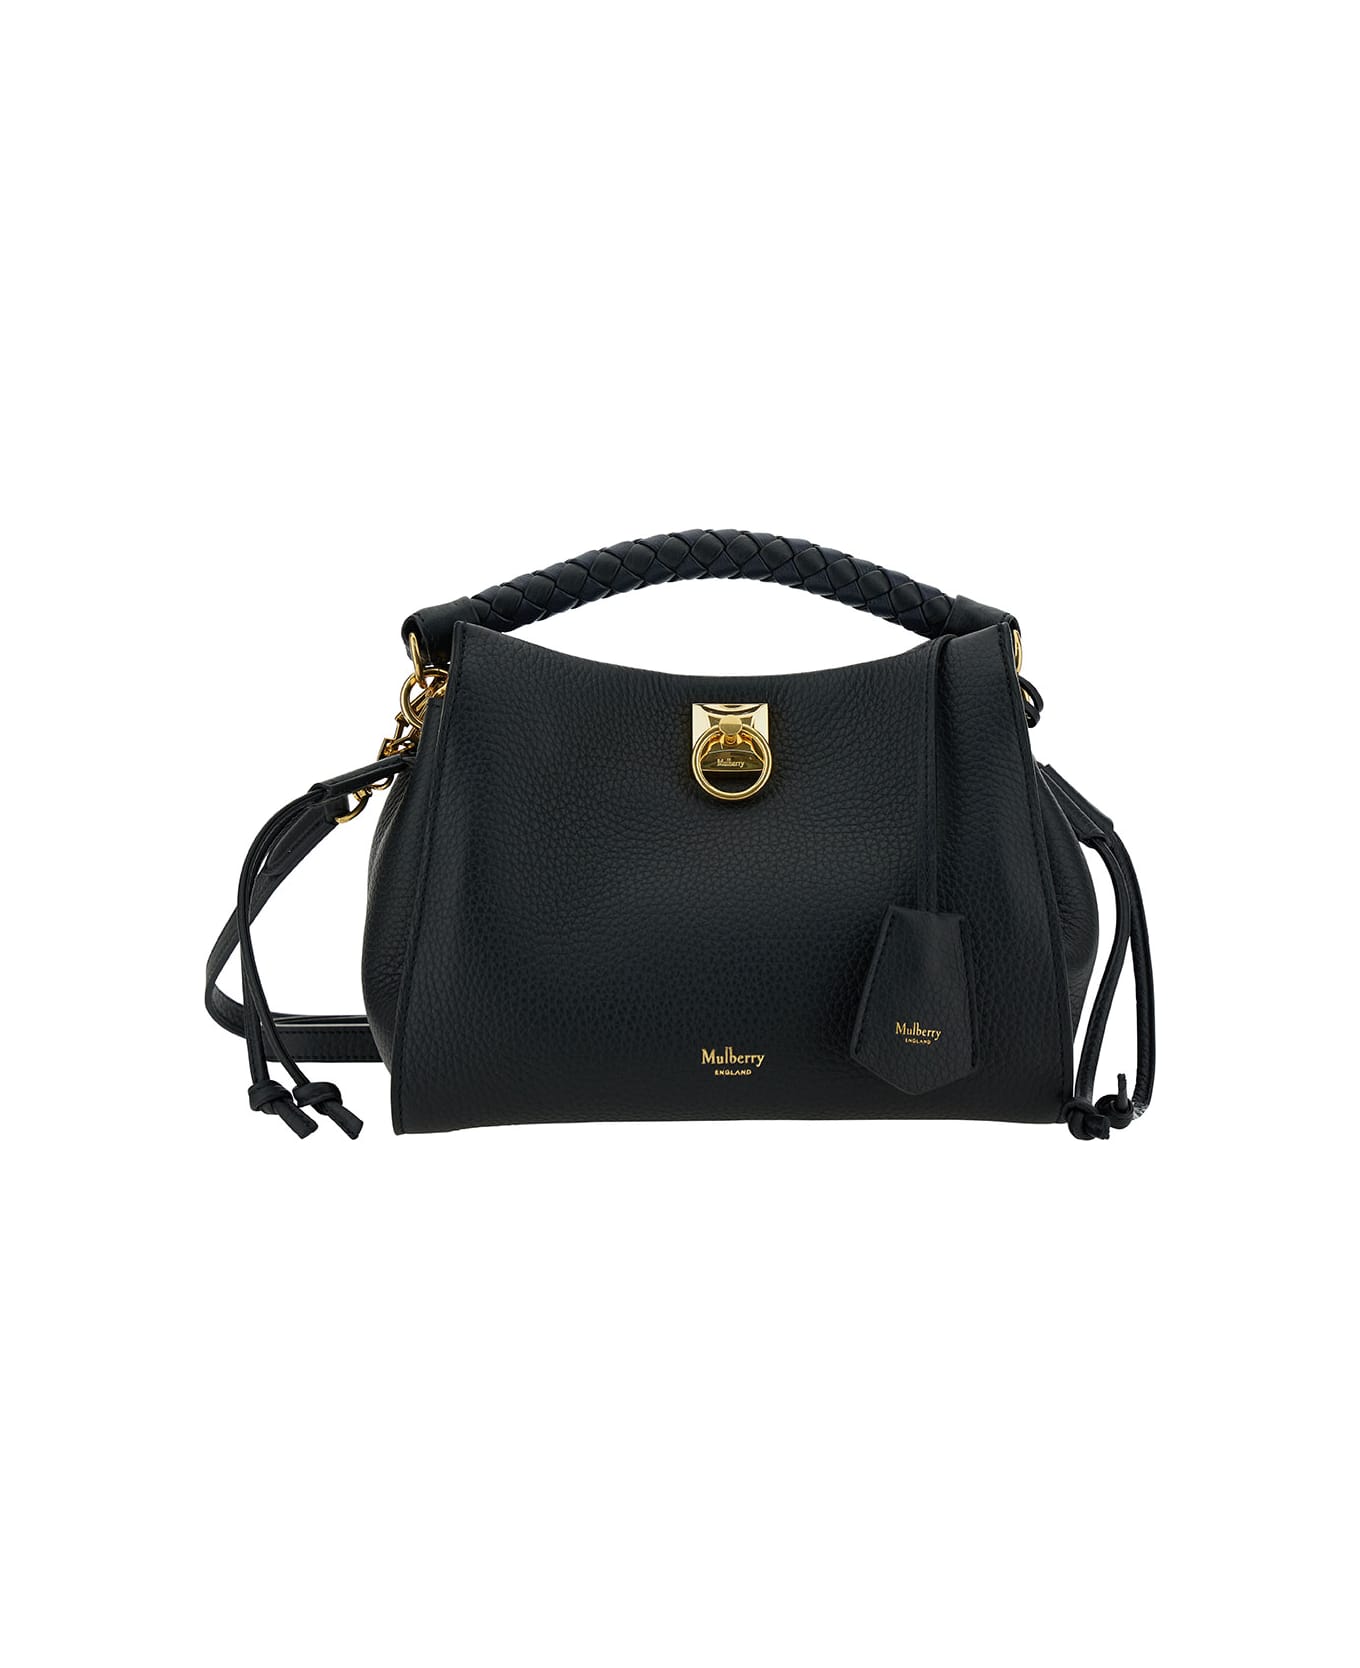 Mulberry 'small Iris' Black Handbag With Logo Detail In Hammered Leather Woman - Black